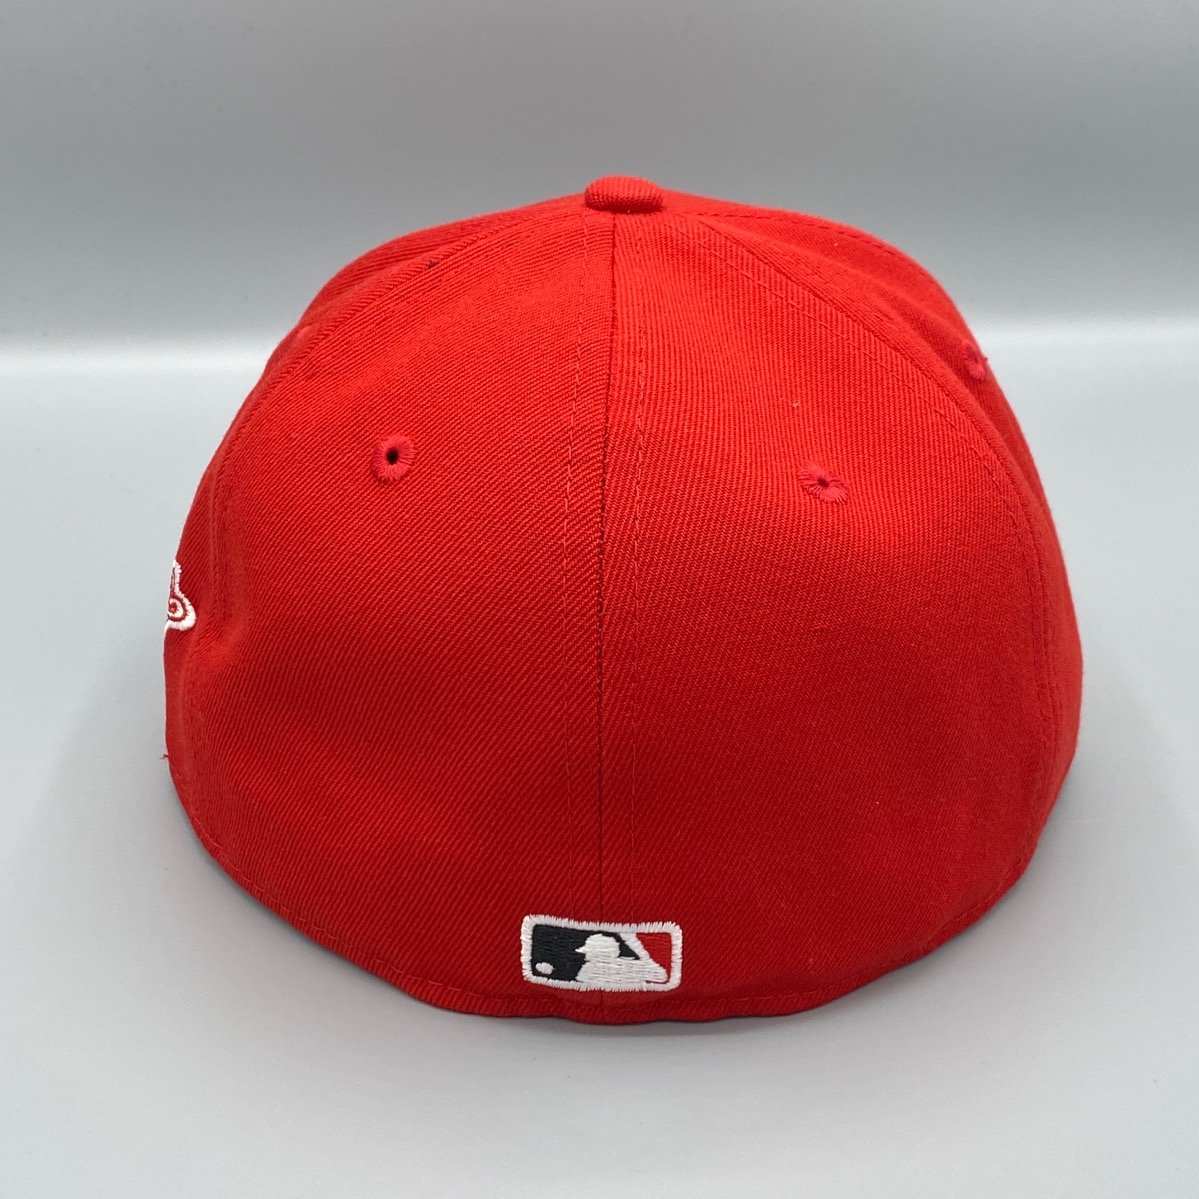 Buy MLB CINCINNATI REDS 59FIFTY CLUBHOUSE CAP for EUR 21.90 on